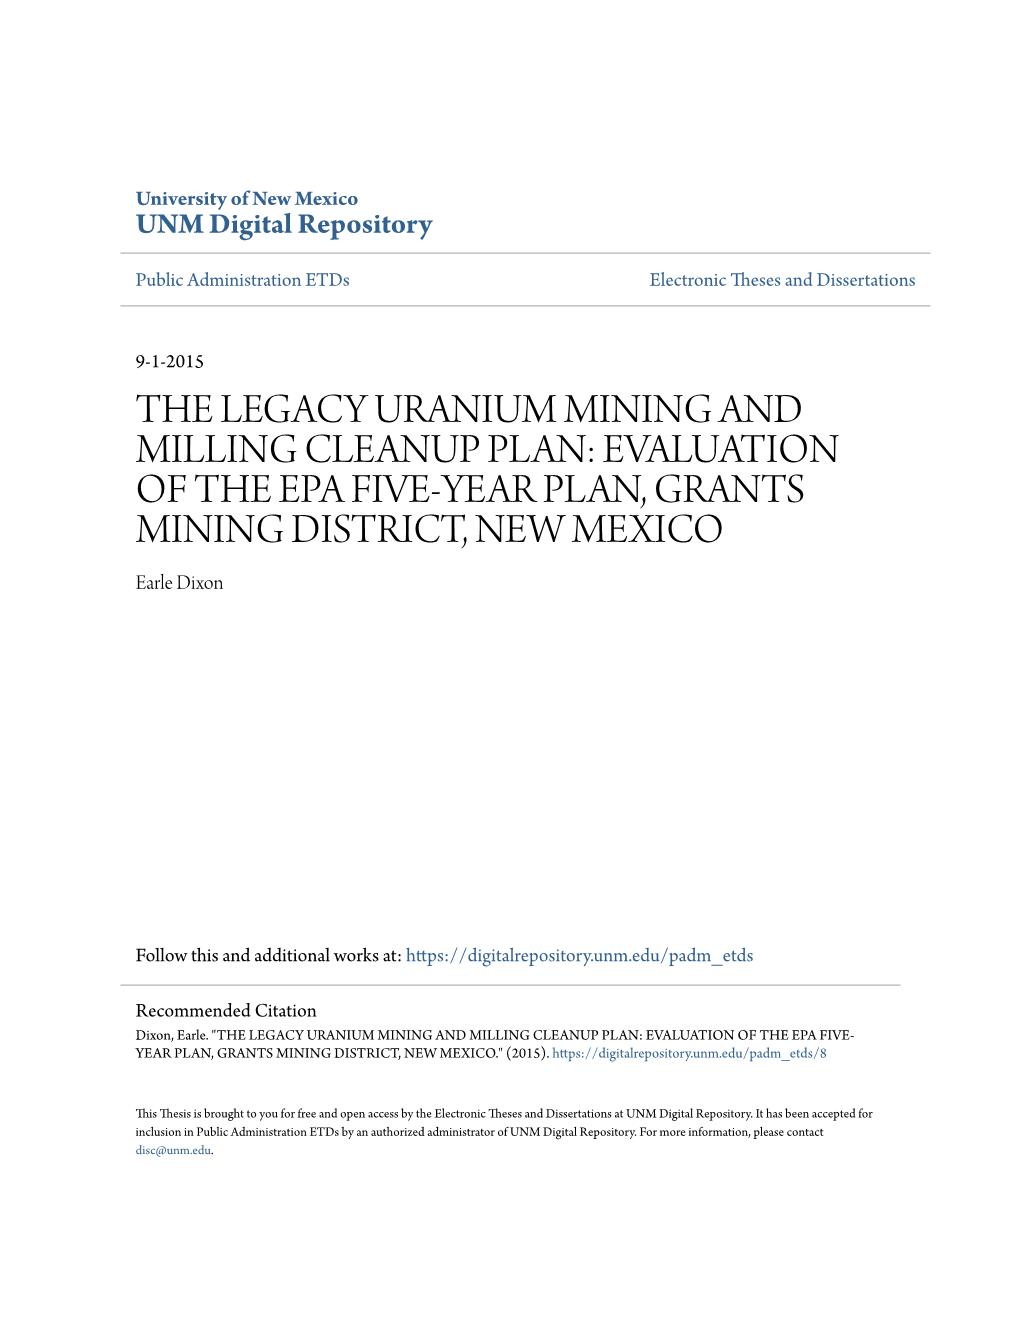 THE LEGACY URANIUM MINING and MILLING CLEANUP PLAN: EVALUATION of the EPA FIVE-YEAR PLAN, GRANTS MINING DISTRICT, NEW MEXICO Earle Dixon